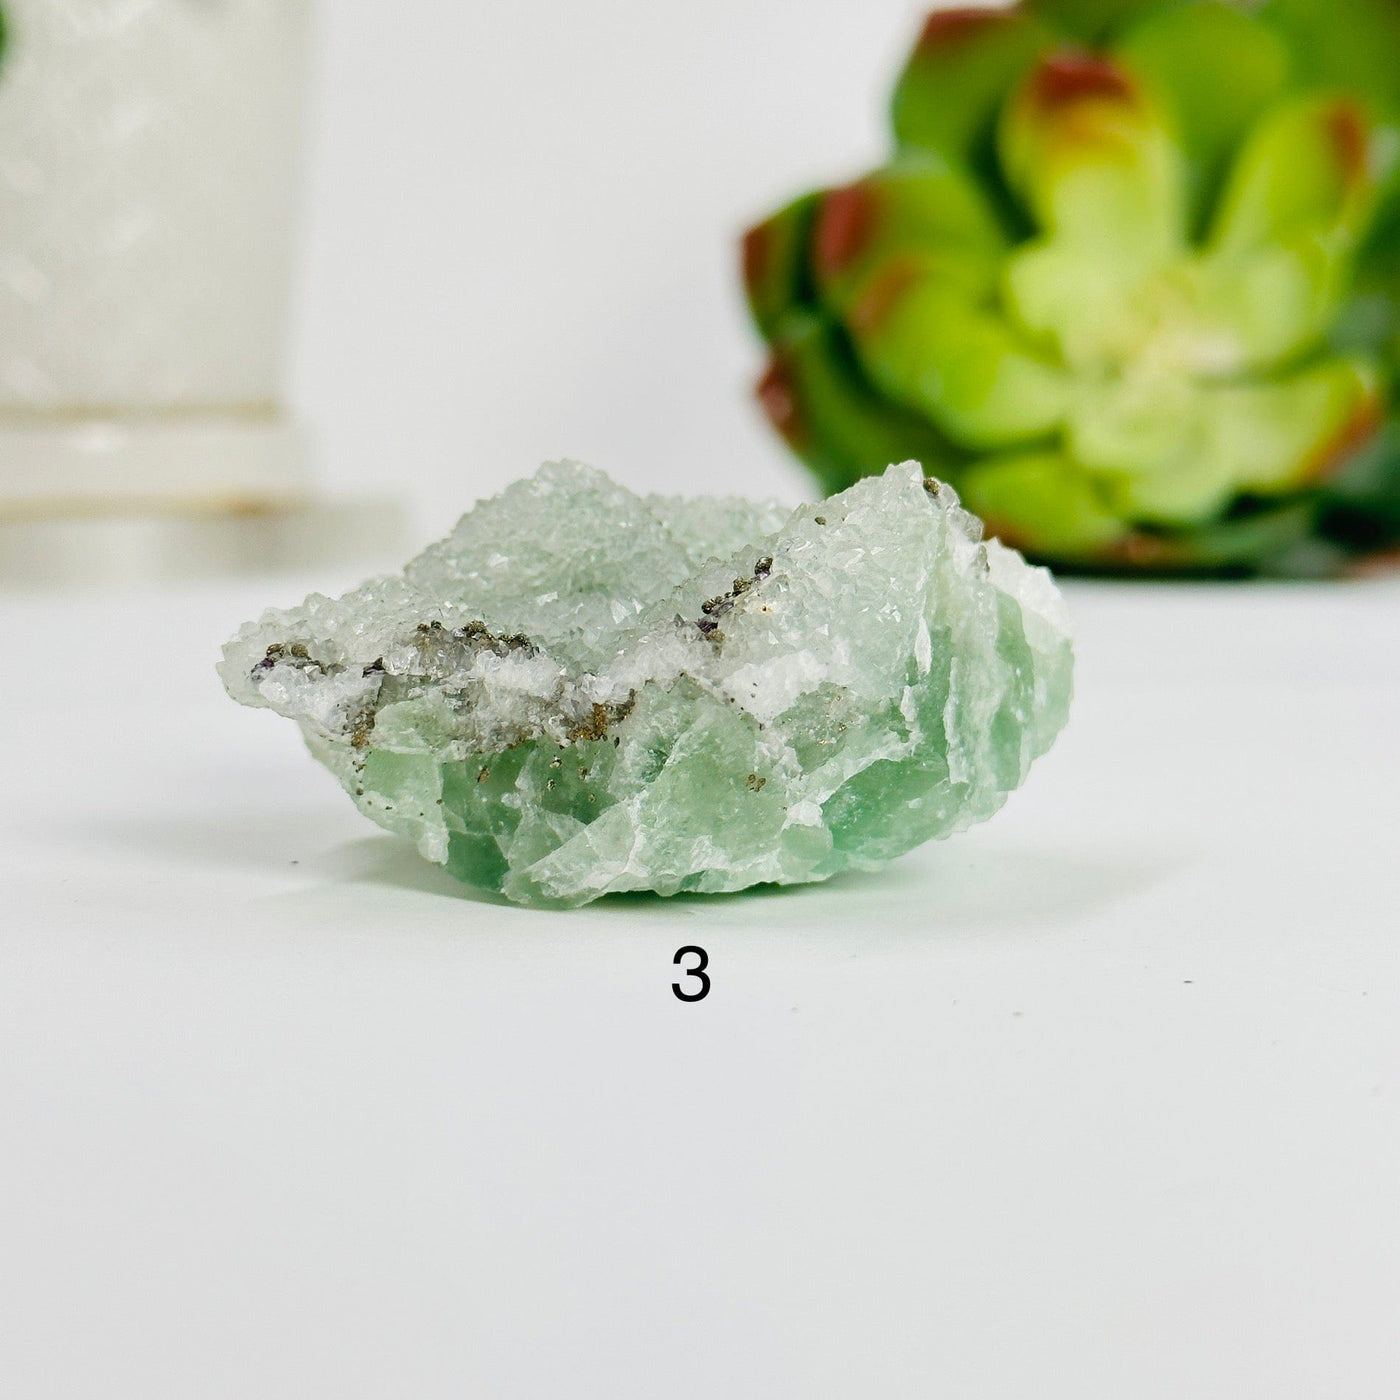 variant 3 of fluorite with pyrite and crystal quartz growth with decorations in the background